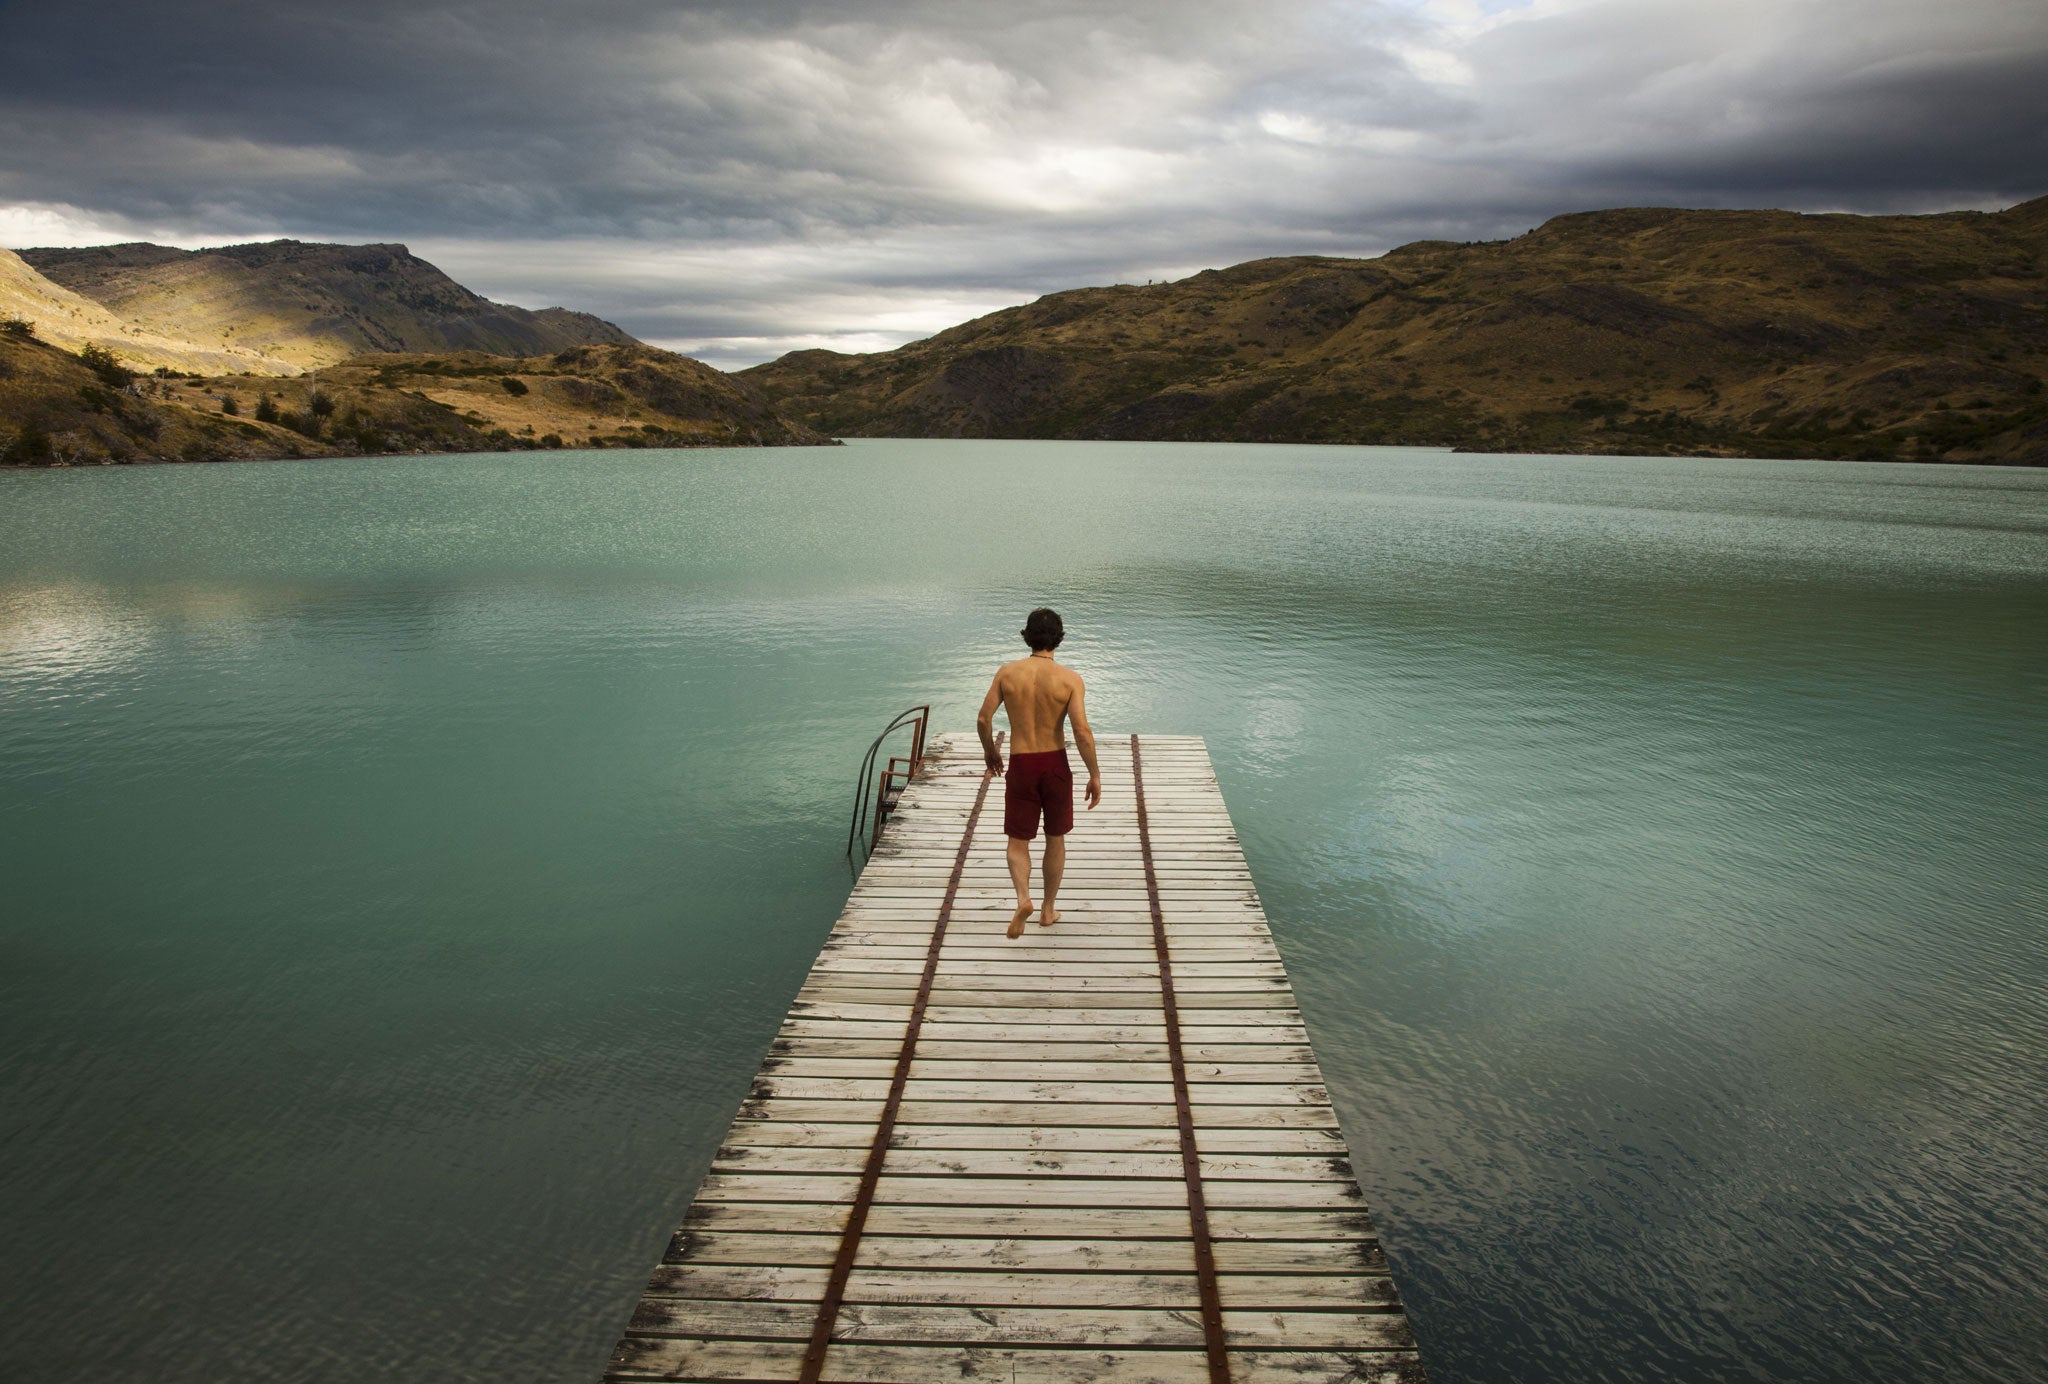 Taking the plunge: wild swimming in Torres del Paine National Park, Chile